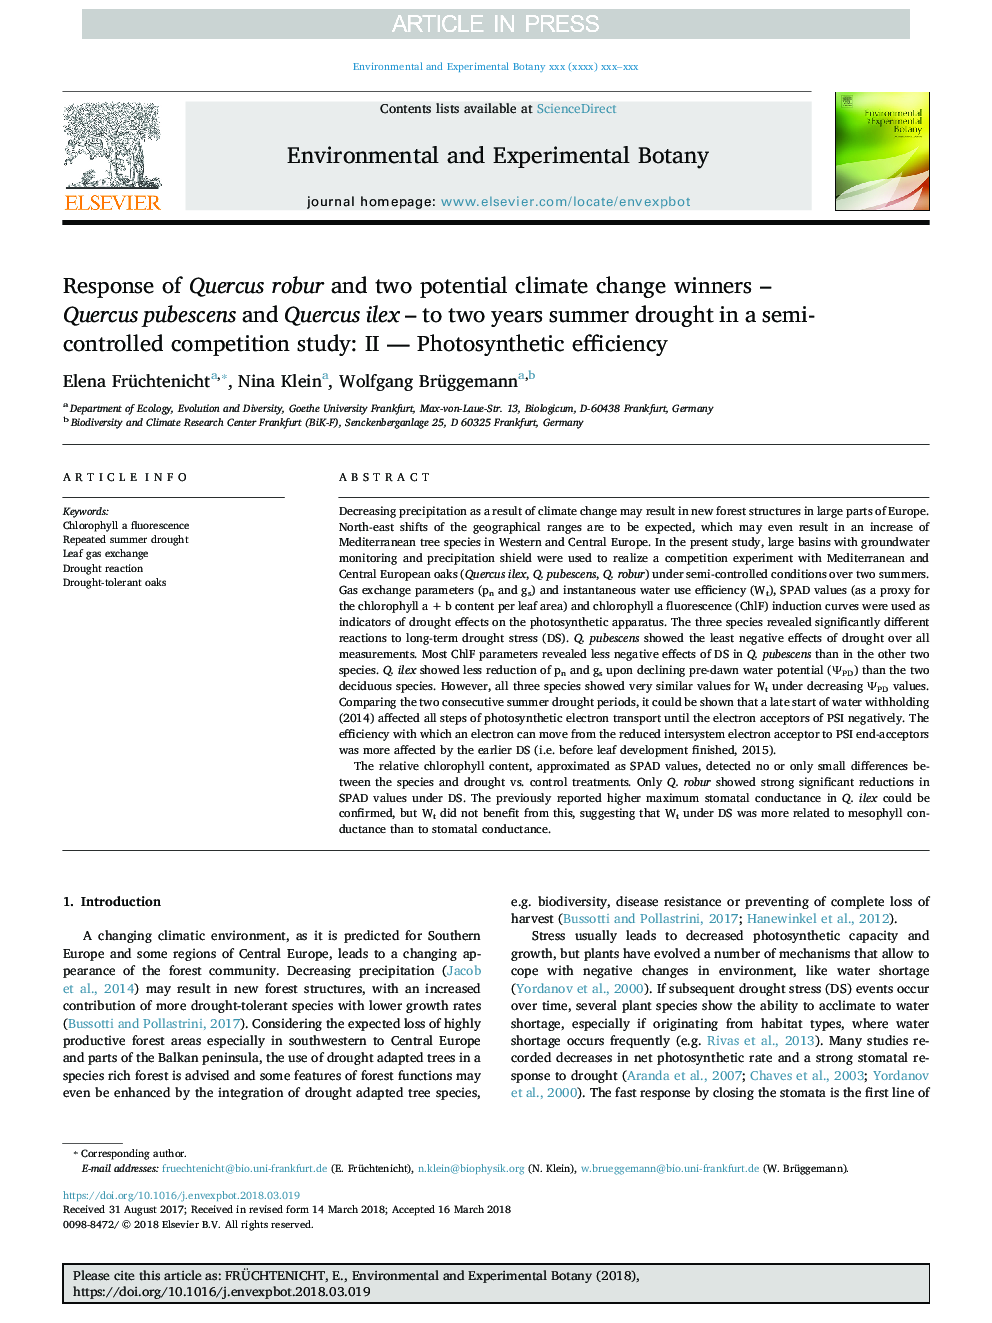 Response of Quercus robur and two potential climate change winners - Quercus pubescens and Quercus ilex - to two years summer drought in a semi-controlled competition study: II - Photosynthetic efficiency